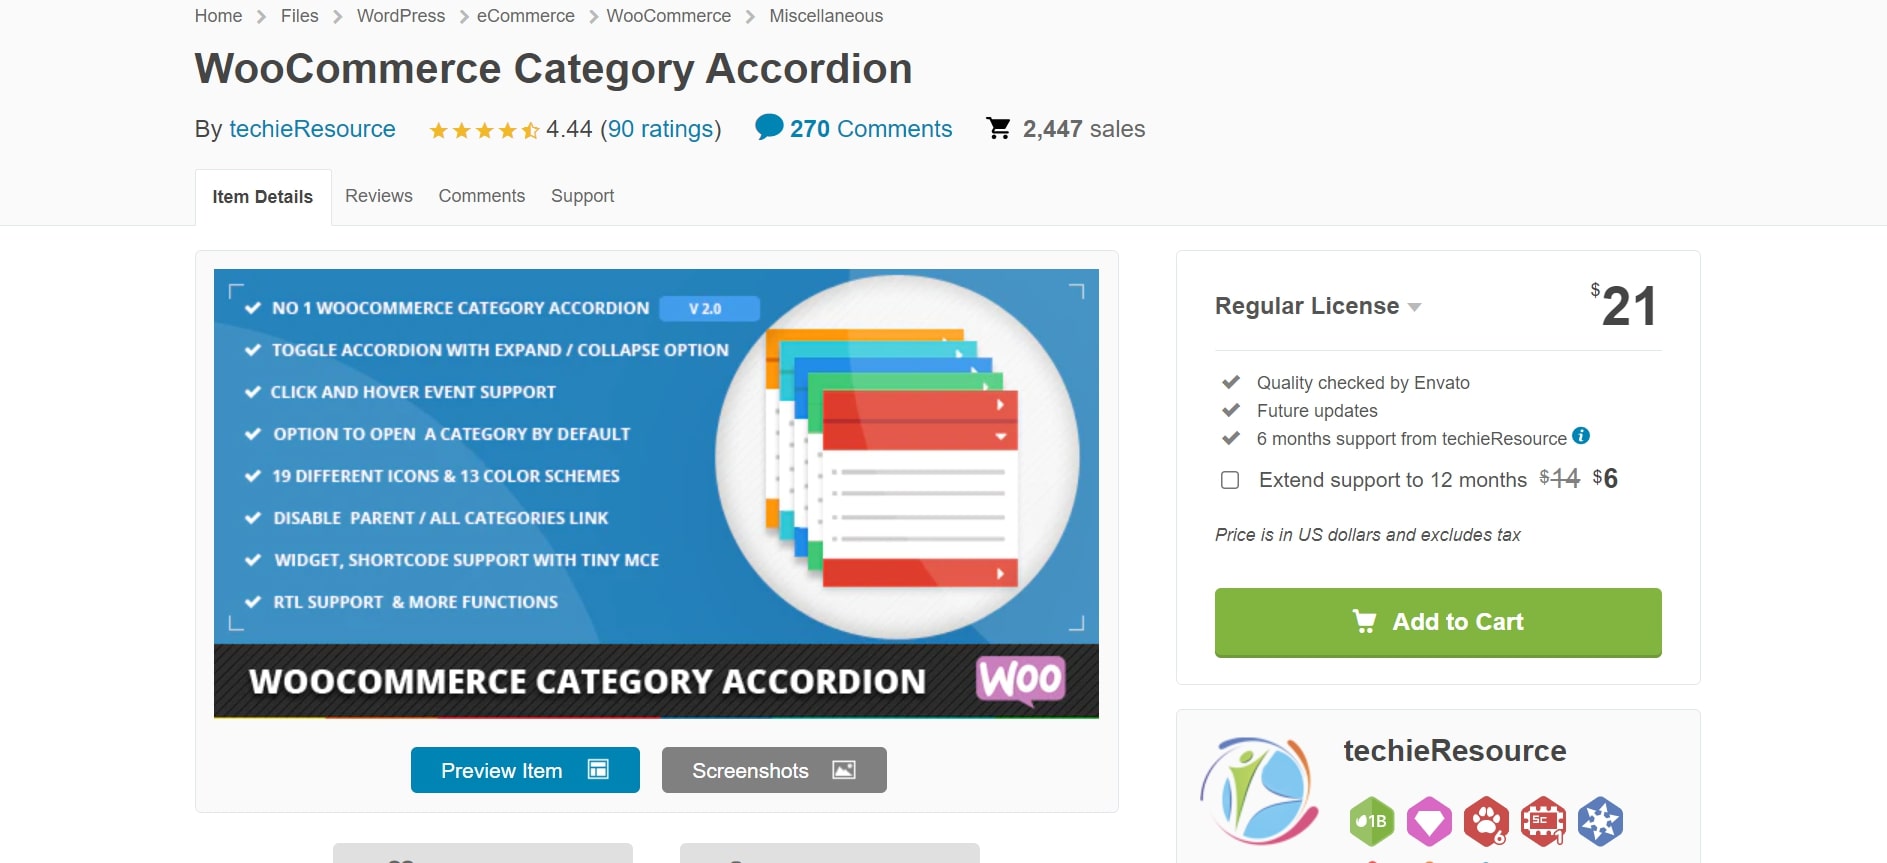 WooCommerce Category Accordion plugin by TechieResource